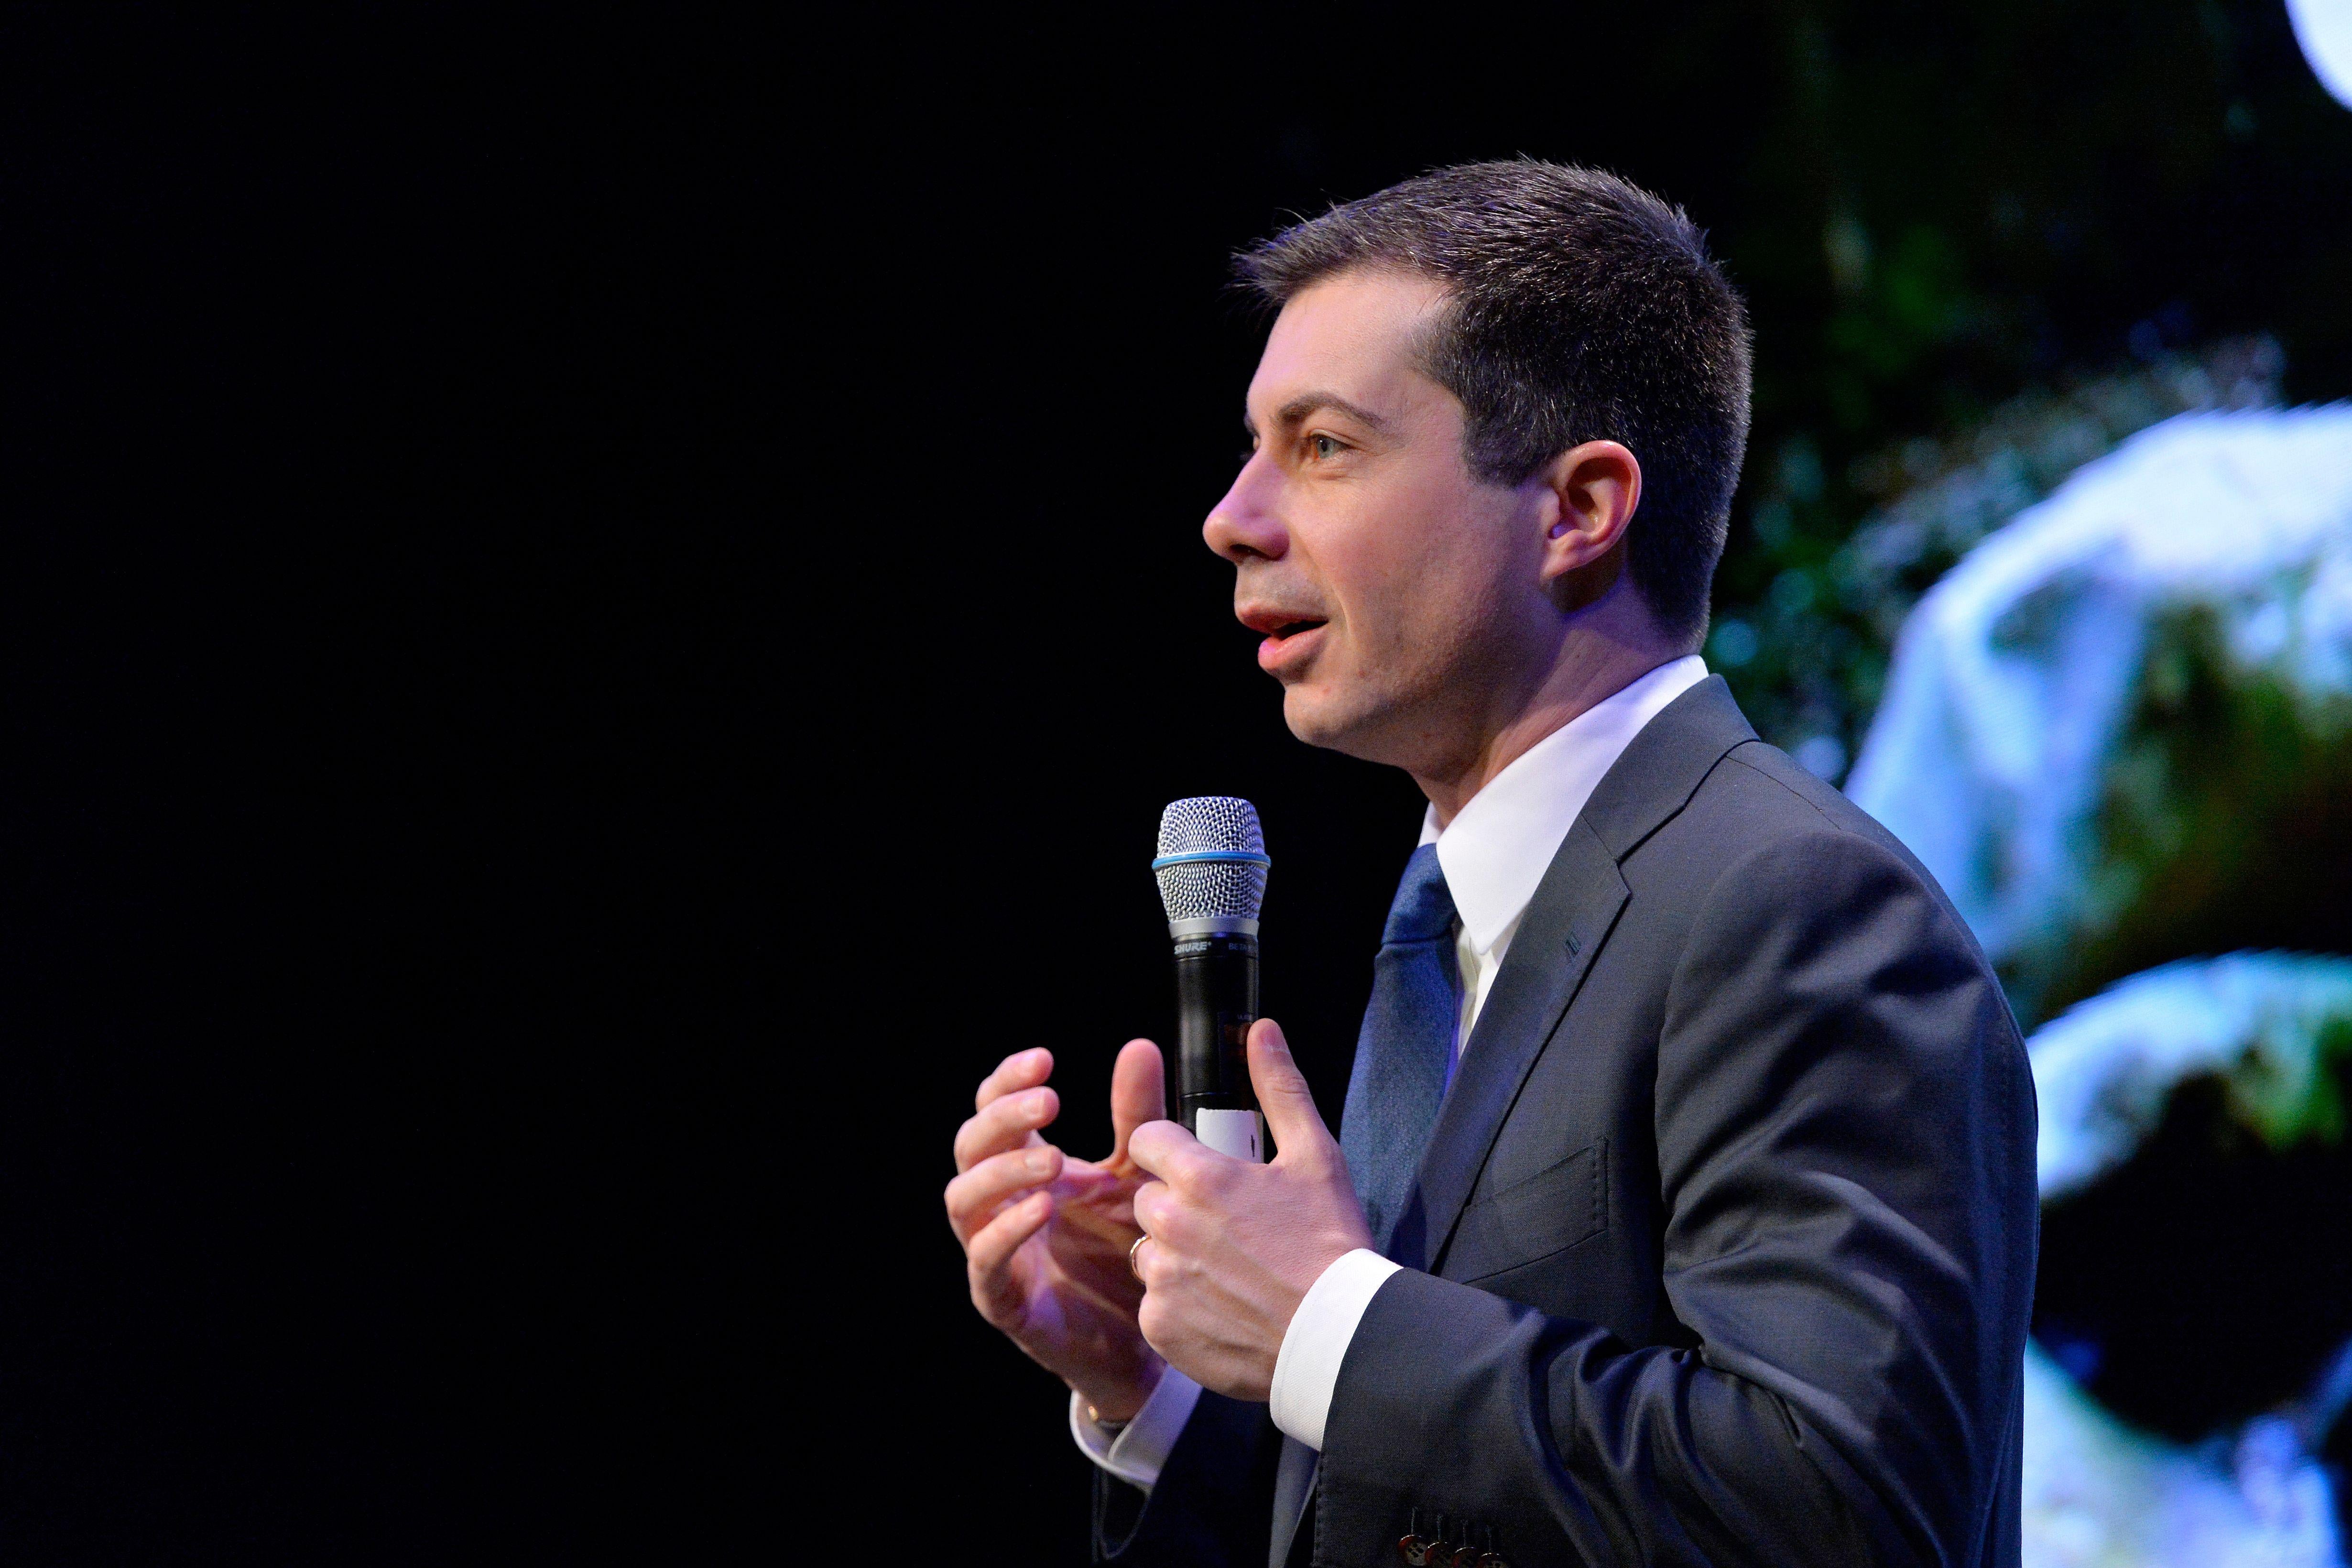 Democratic presidential candidate Pete Buttigieg speaks at the New Hampshire Youth Climate and Clean Energy Town Hall at the Bank Of New Hampshire Stage in Concord, New Hampshire on February 5, 2020. (Photo by Joseph Prezioso / AFP) (Photo by JOSEPH PREZIOSO/AFP via Getty Images)